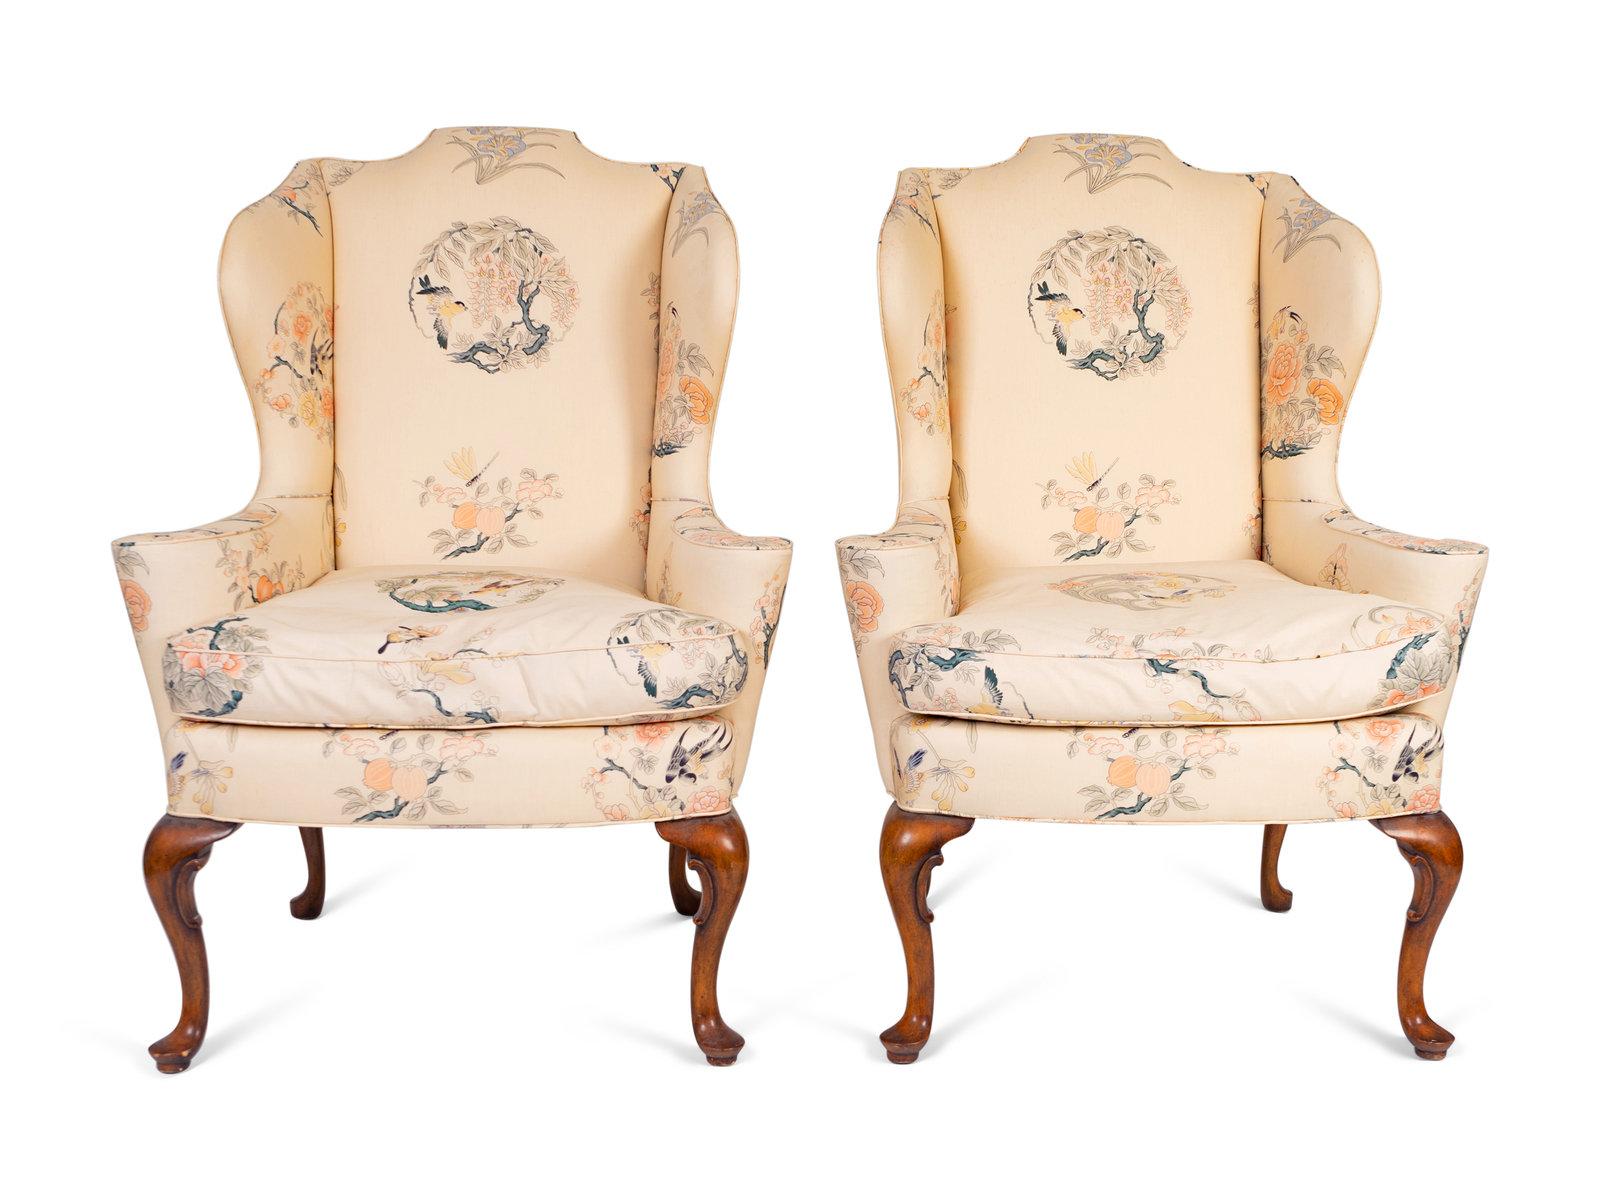 Pair of Queen Anne Style Wingback chairs with Asian design silk upholstery, 20th century.